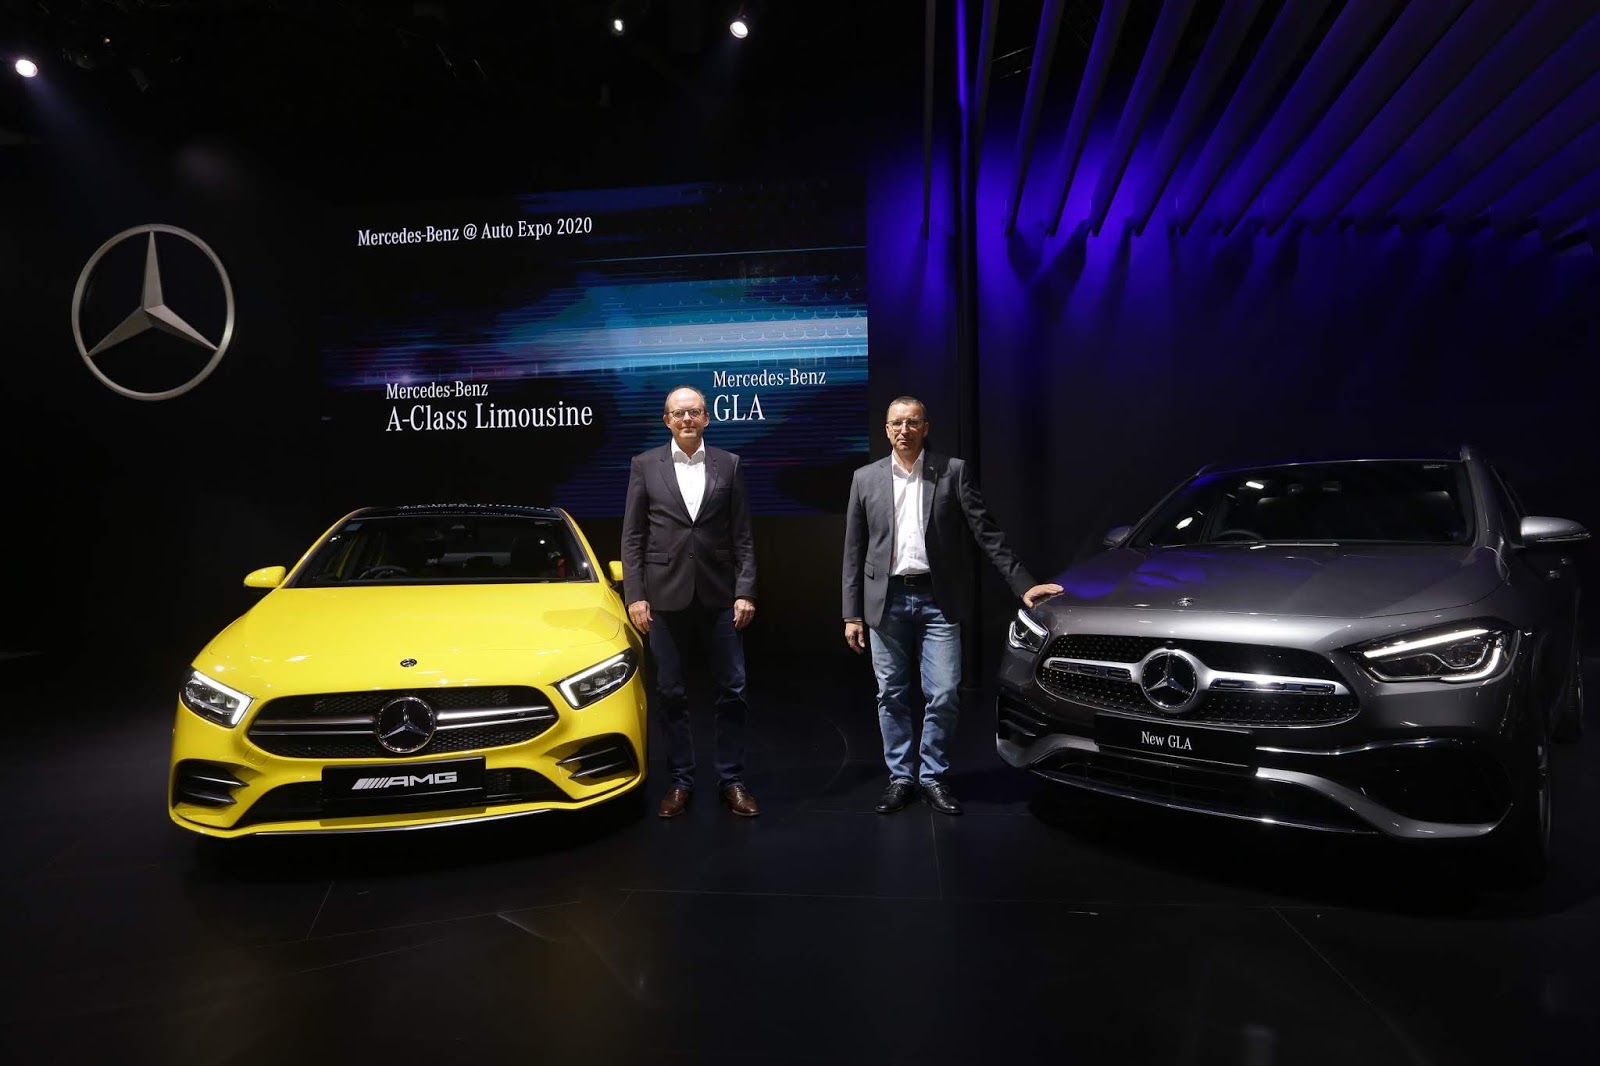 Mercedes-AMG A35 4M Limousine and the new GLA